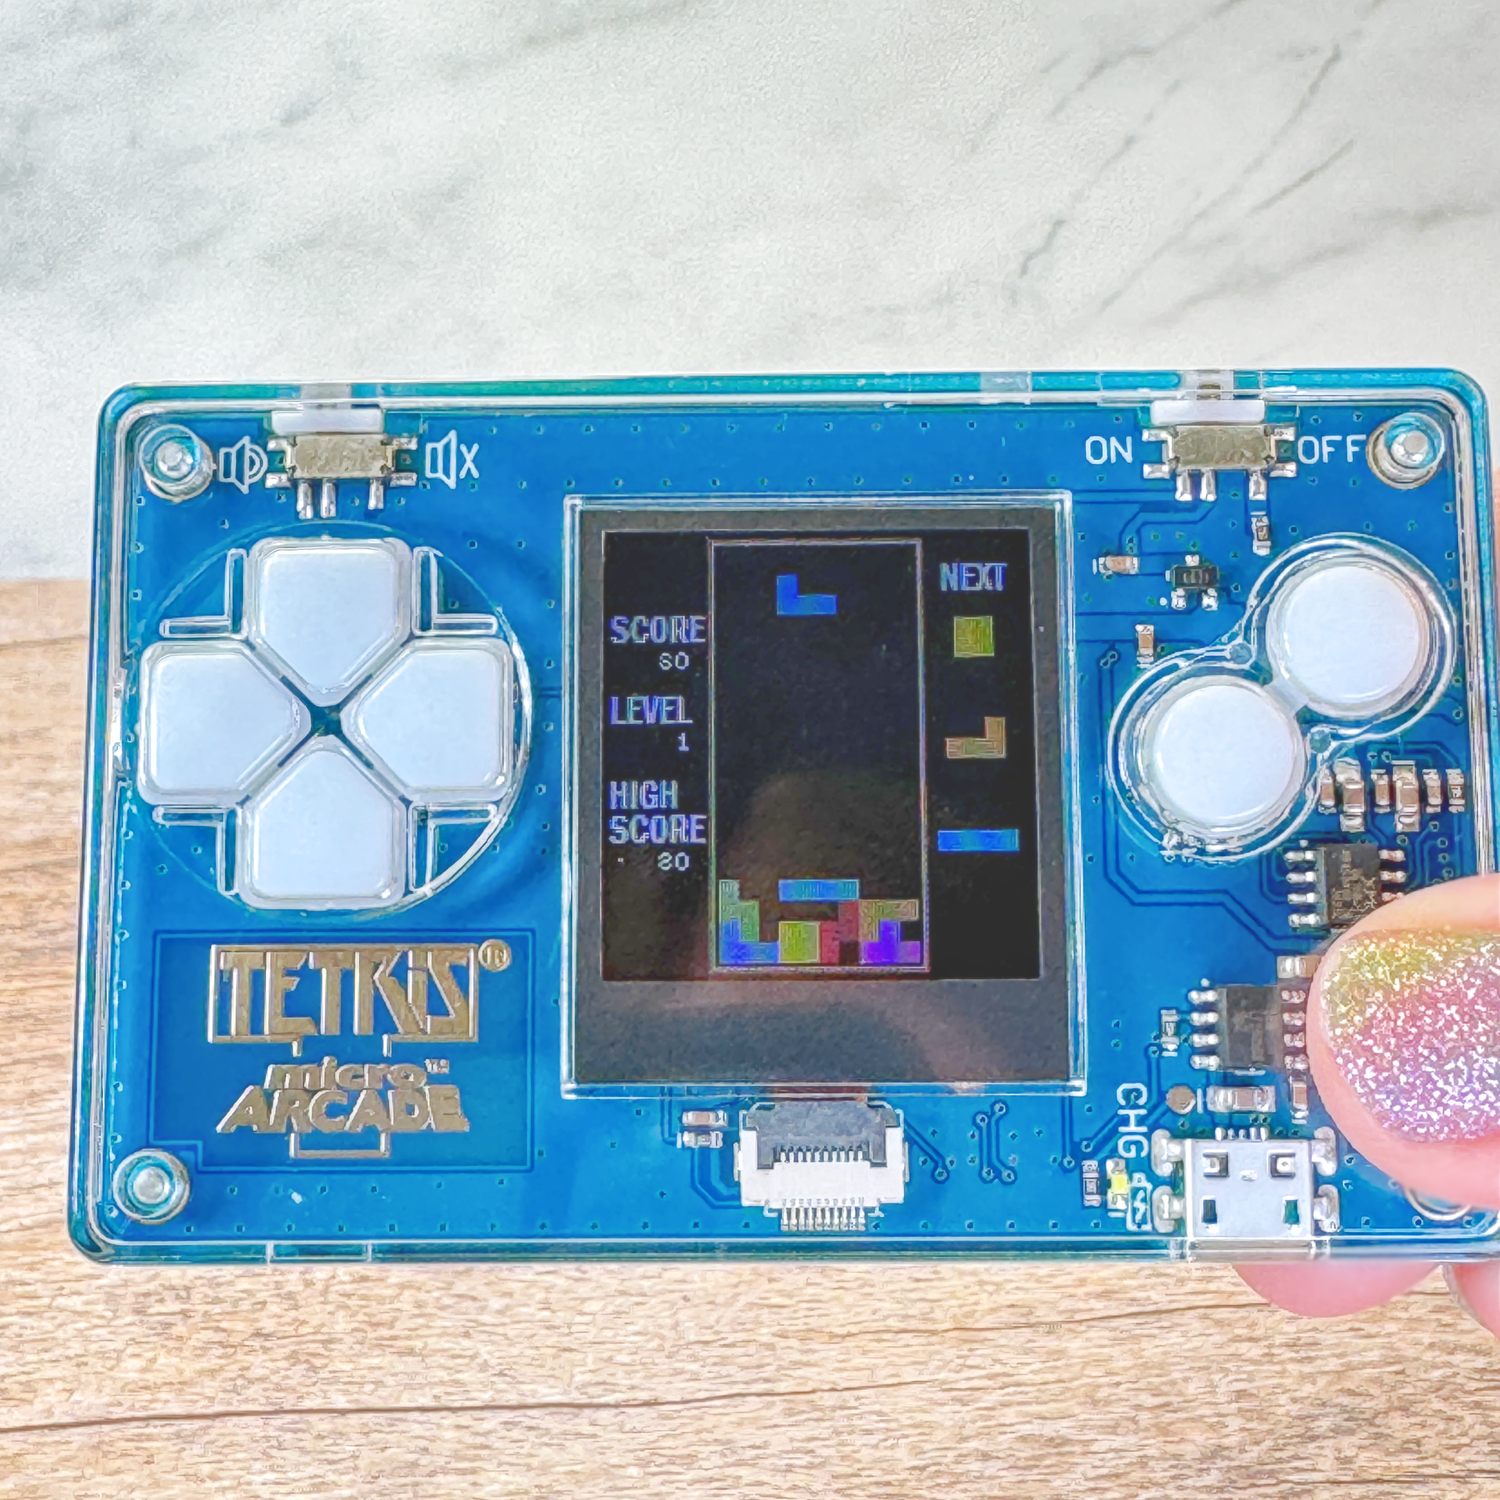 A hand holds the Micro Tetris Arcade but the player has made some mistakes.